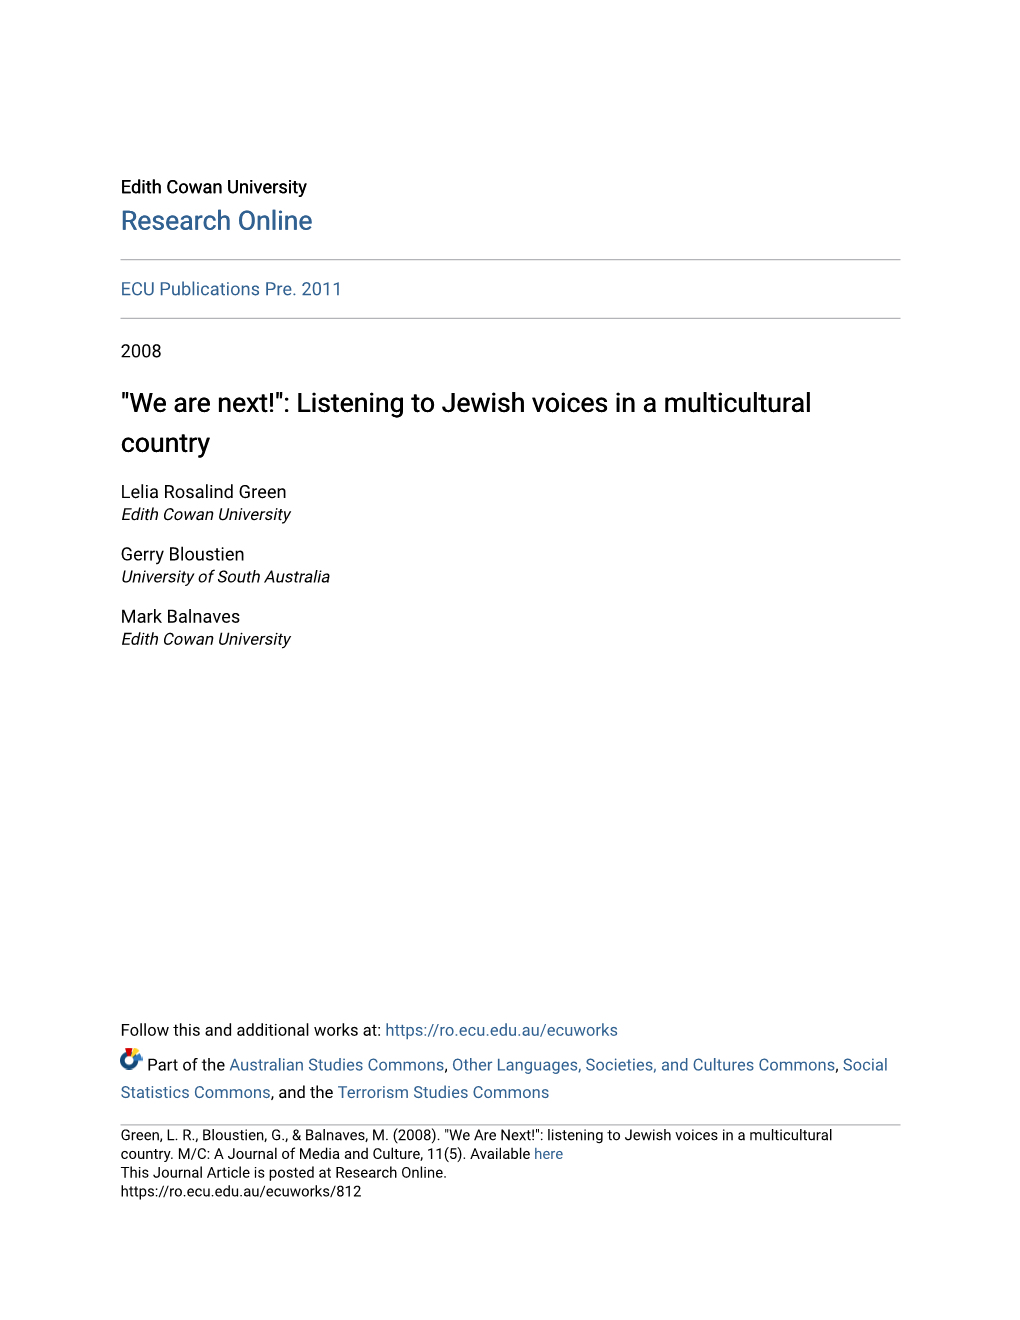 Listening to Jewish Voices in a Multicultural Country